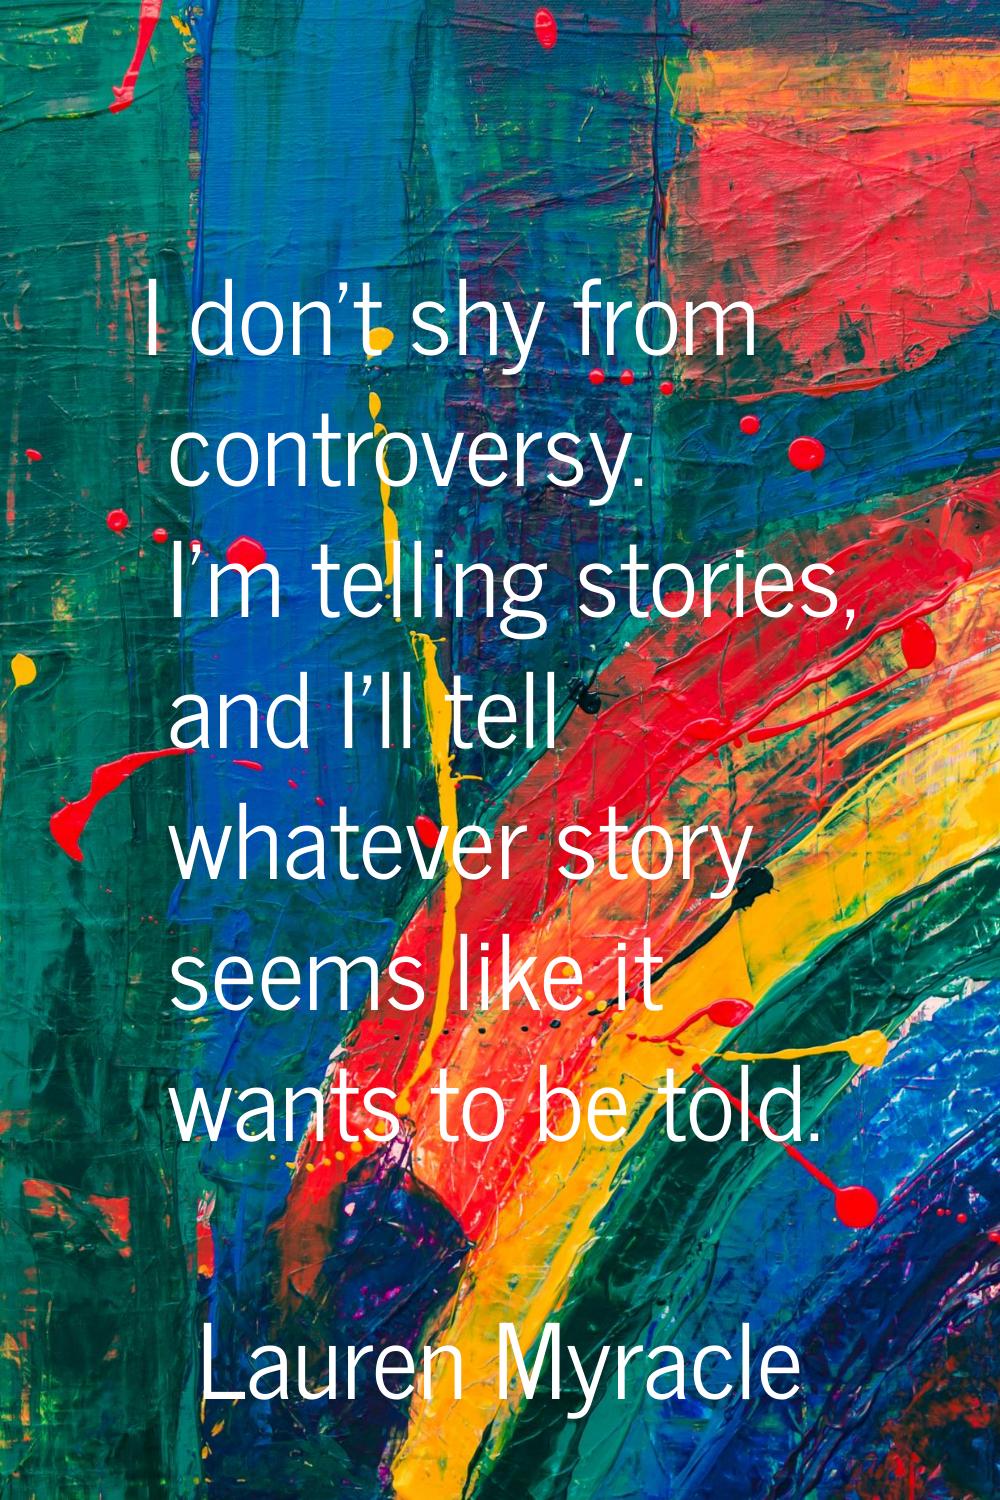 I don't shy from controversy. I'm telling stories, and I'll tell whatever story seems like it wants